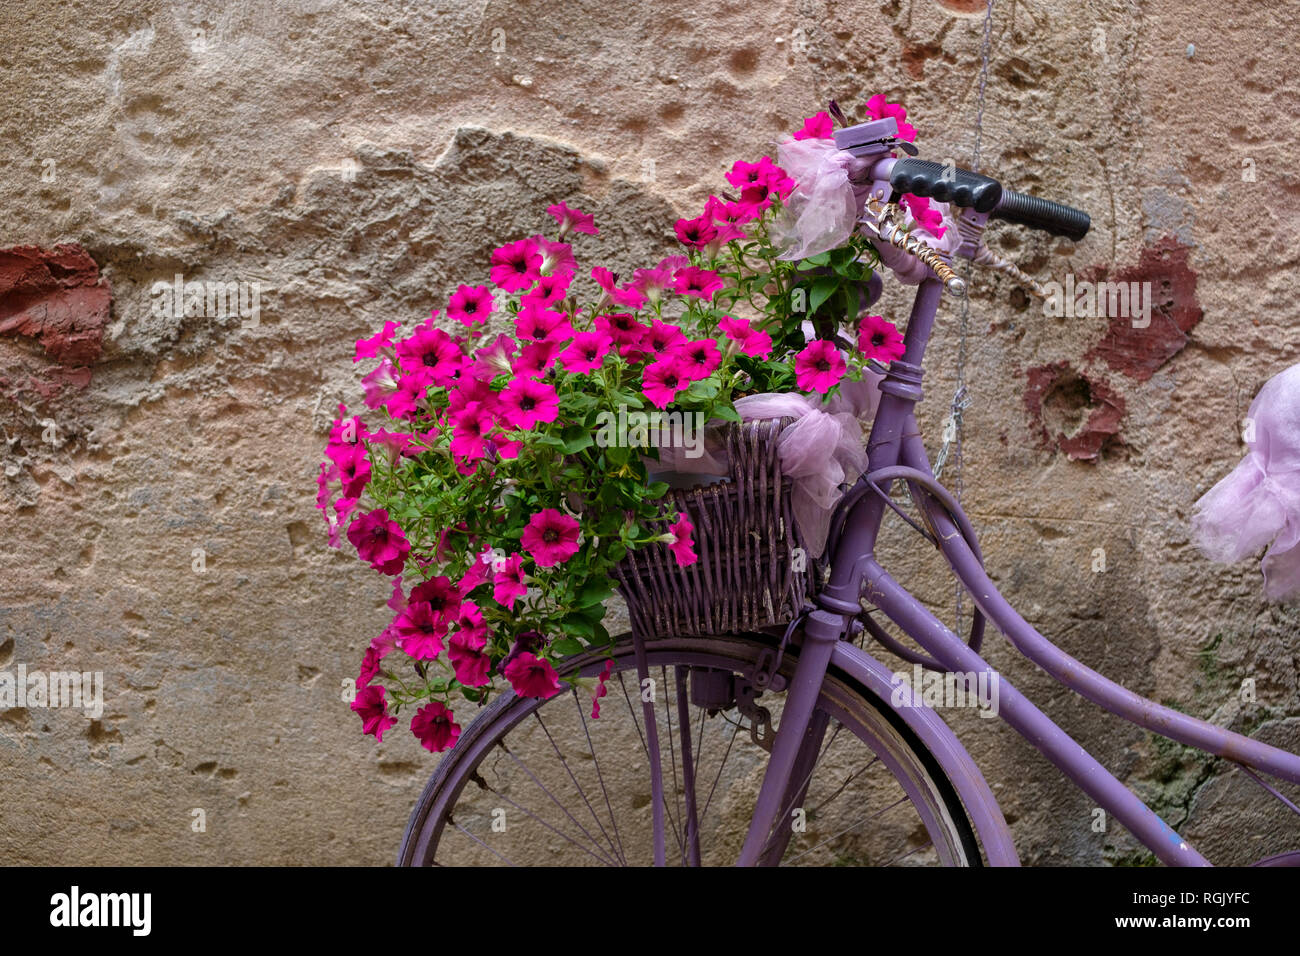 Italy, old bicycle with flowers Stock Photo